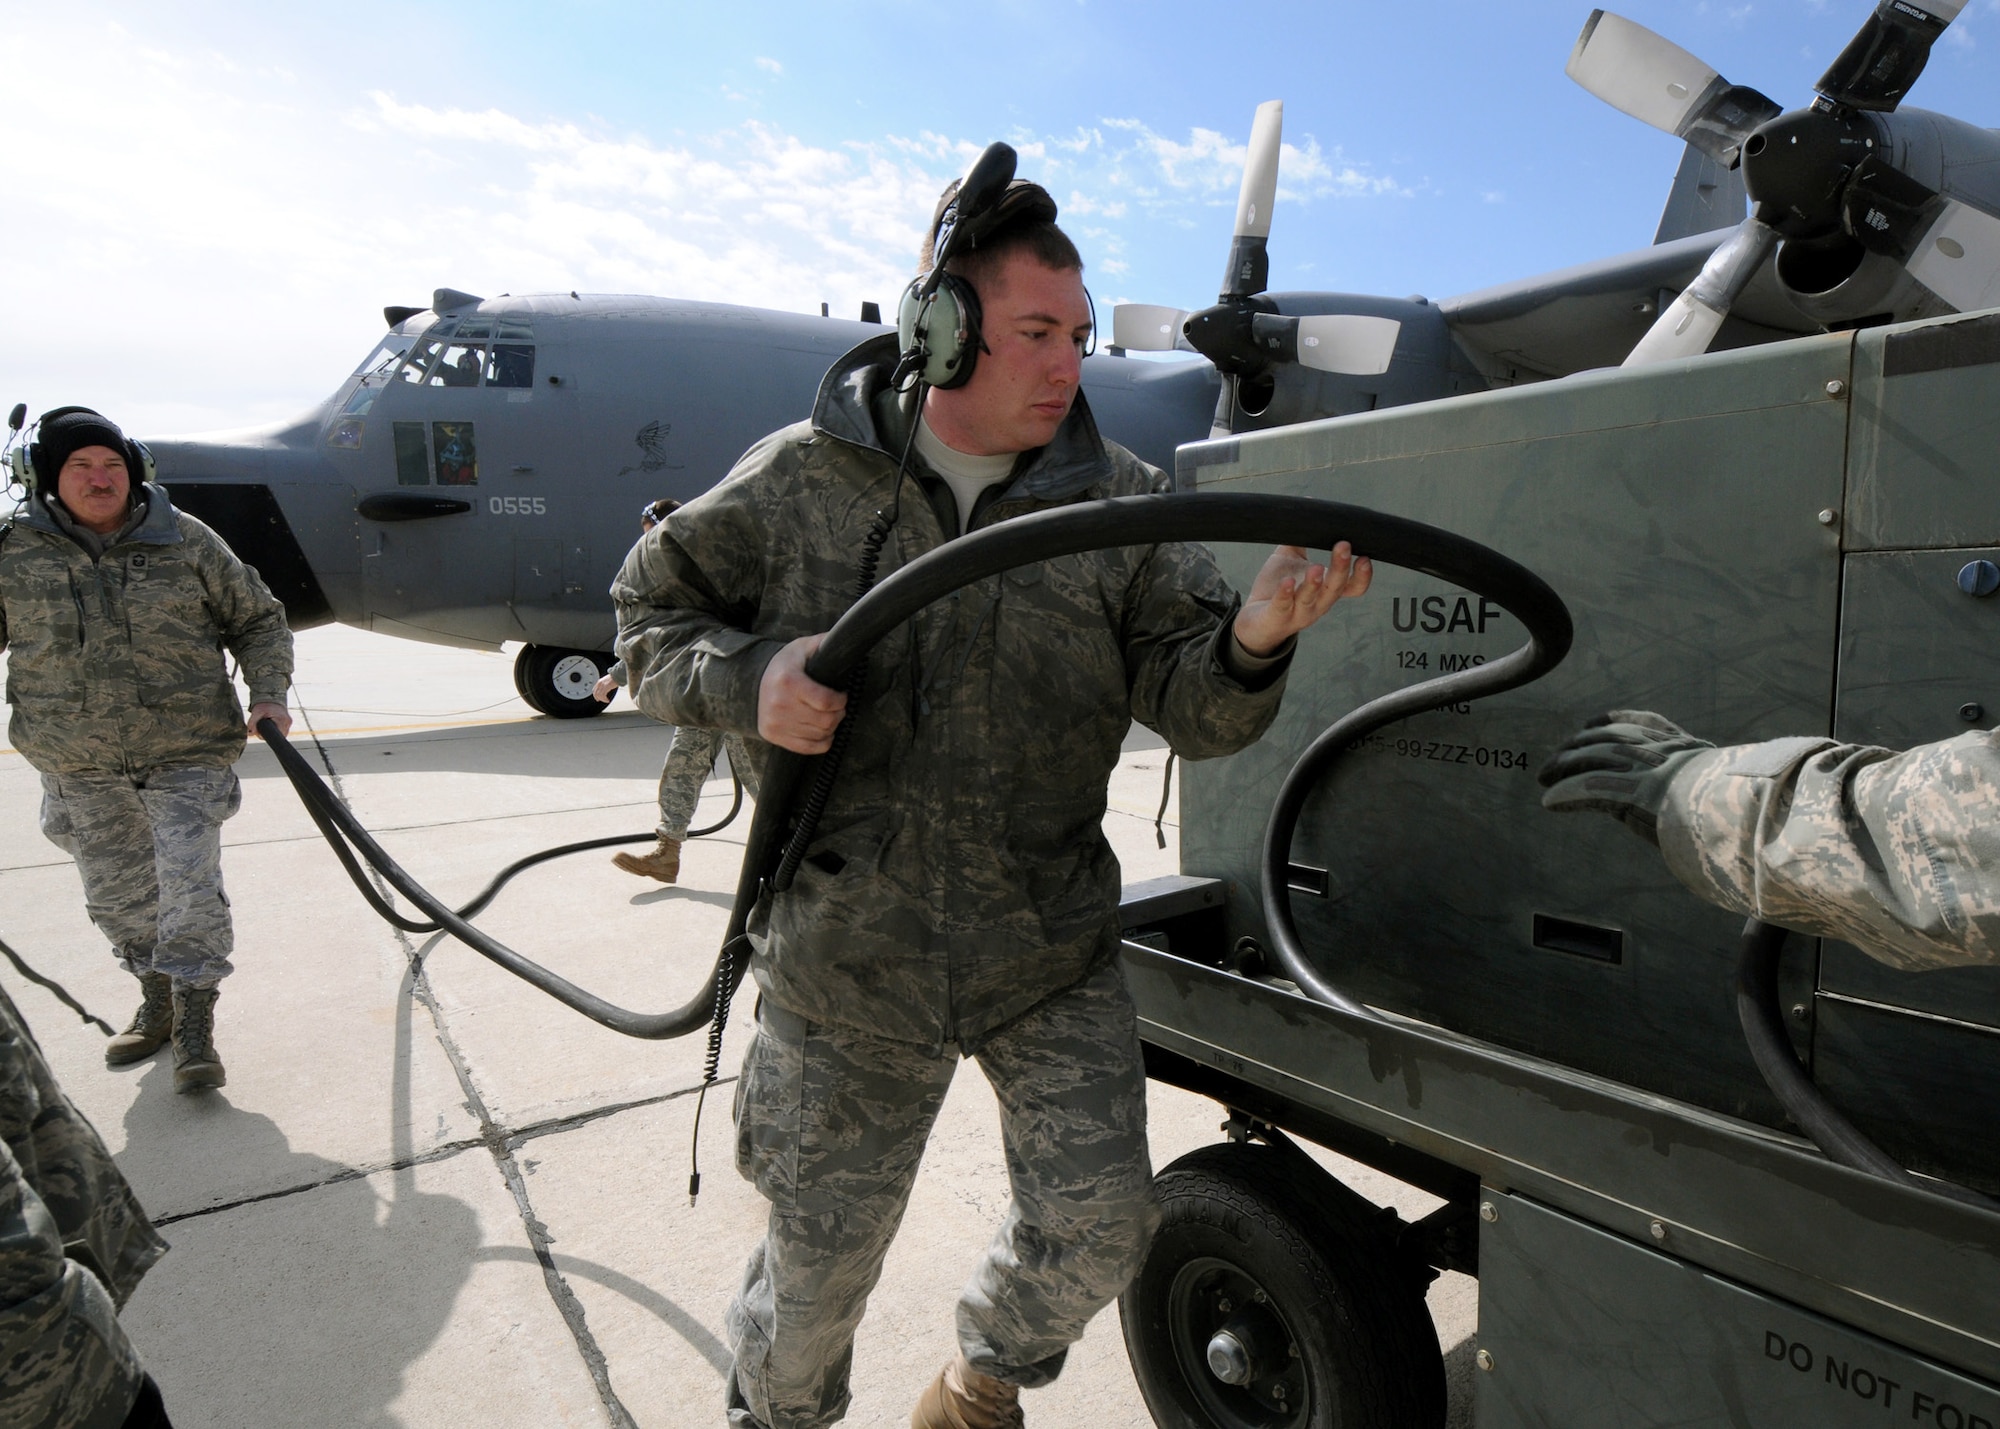 Staff Sgt. Travis Hooper, 179th Maintenance Group, and Senior Master Sgt. William McAnelly, 919th Maintenance Group, brings back the power cable from MC-130E Combat Talon #555 prior to its final flight May 5 from Gowen Field, Idaho.  919th, along with the 179th were sent to Boise, Idaho, to prepare four Talons to take off for one more mission – a flight into retirement and decommissioning.  Three of the Talons flew to Davis-Monthan Air Force Base, Ariz.  The other went to Hurlburt Field, Fla., to be placed in the Air Force Special Operations Command airpark.  (U.S. Air Force photo/Tech. Sgt. Samuel King Jr.)  